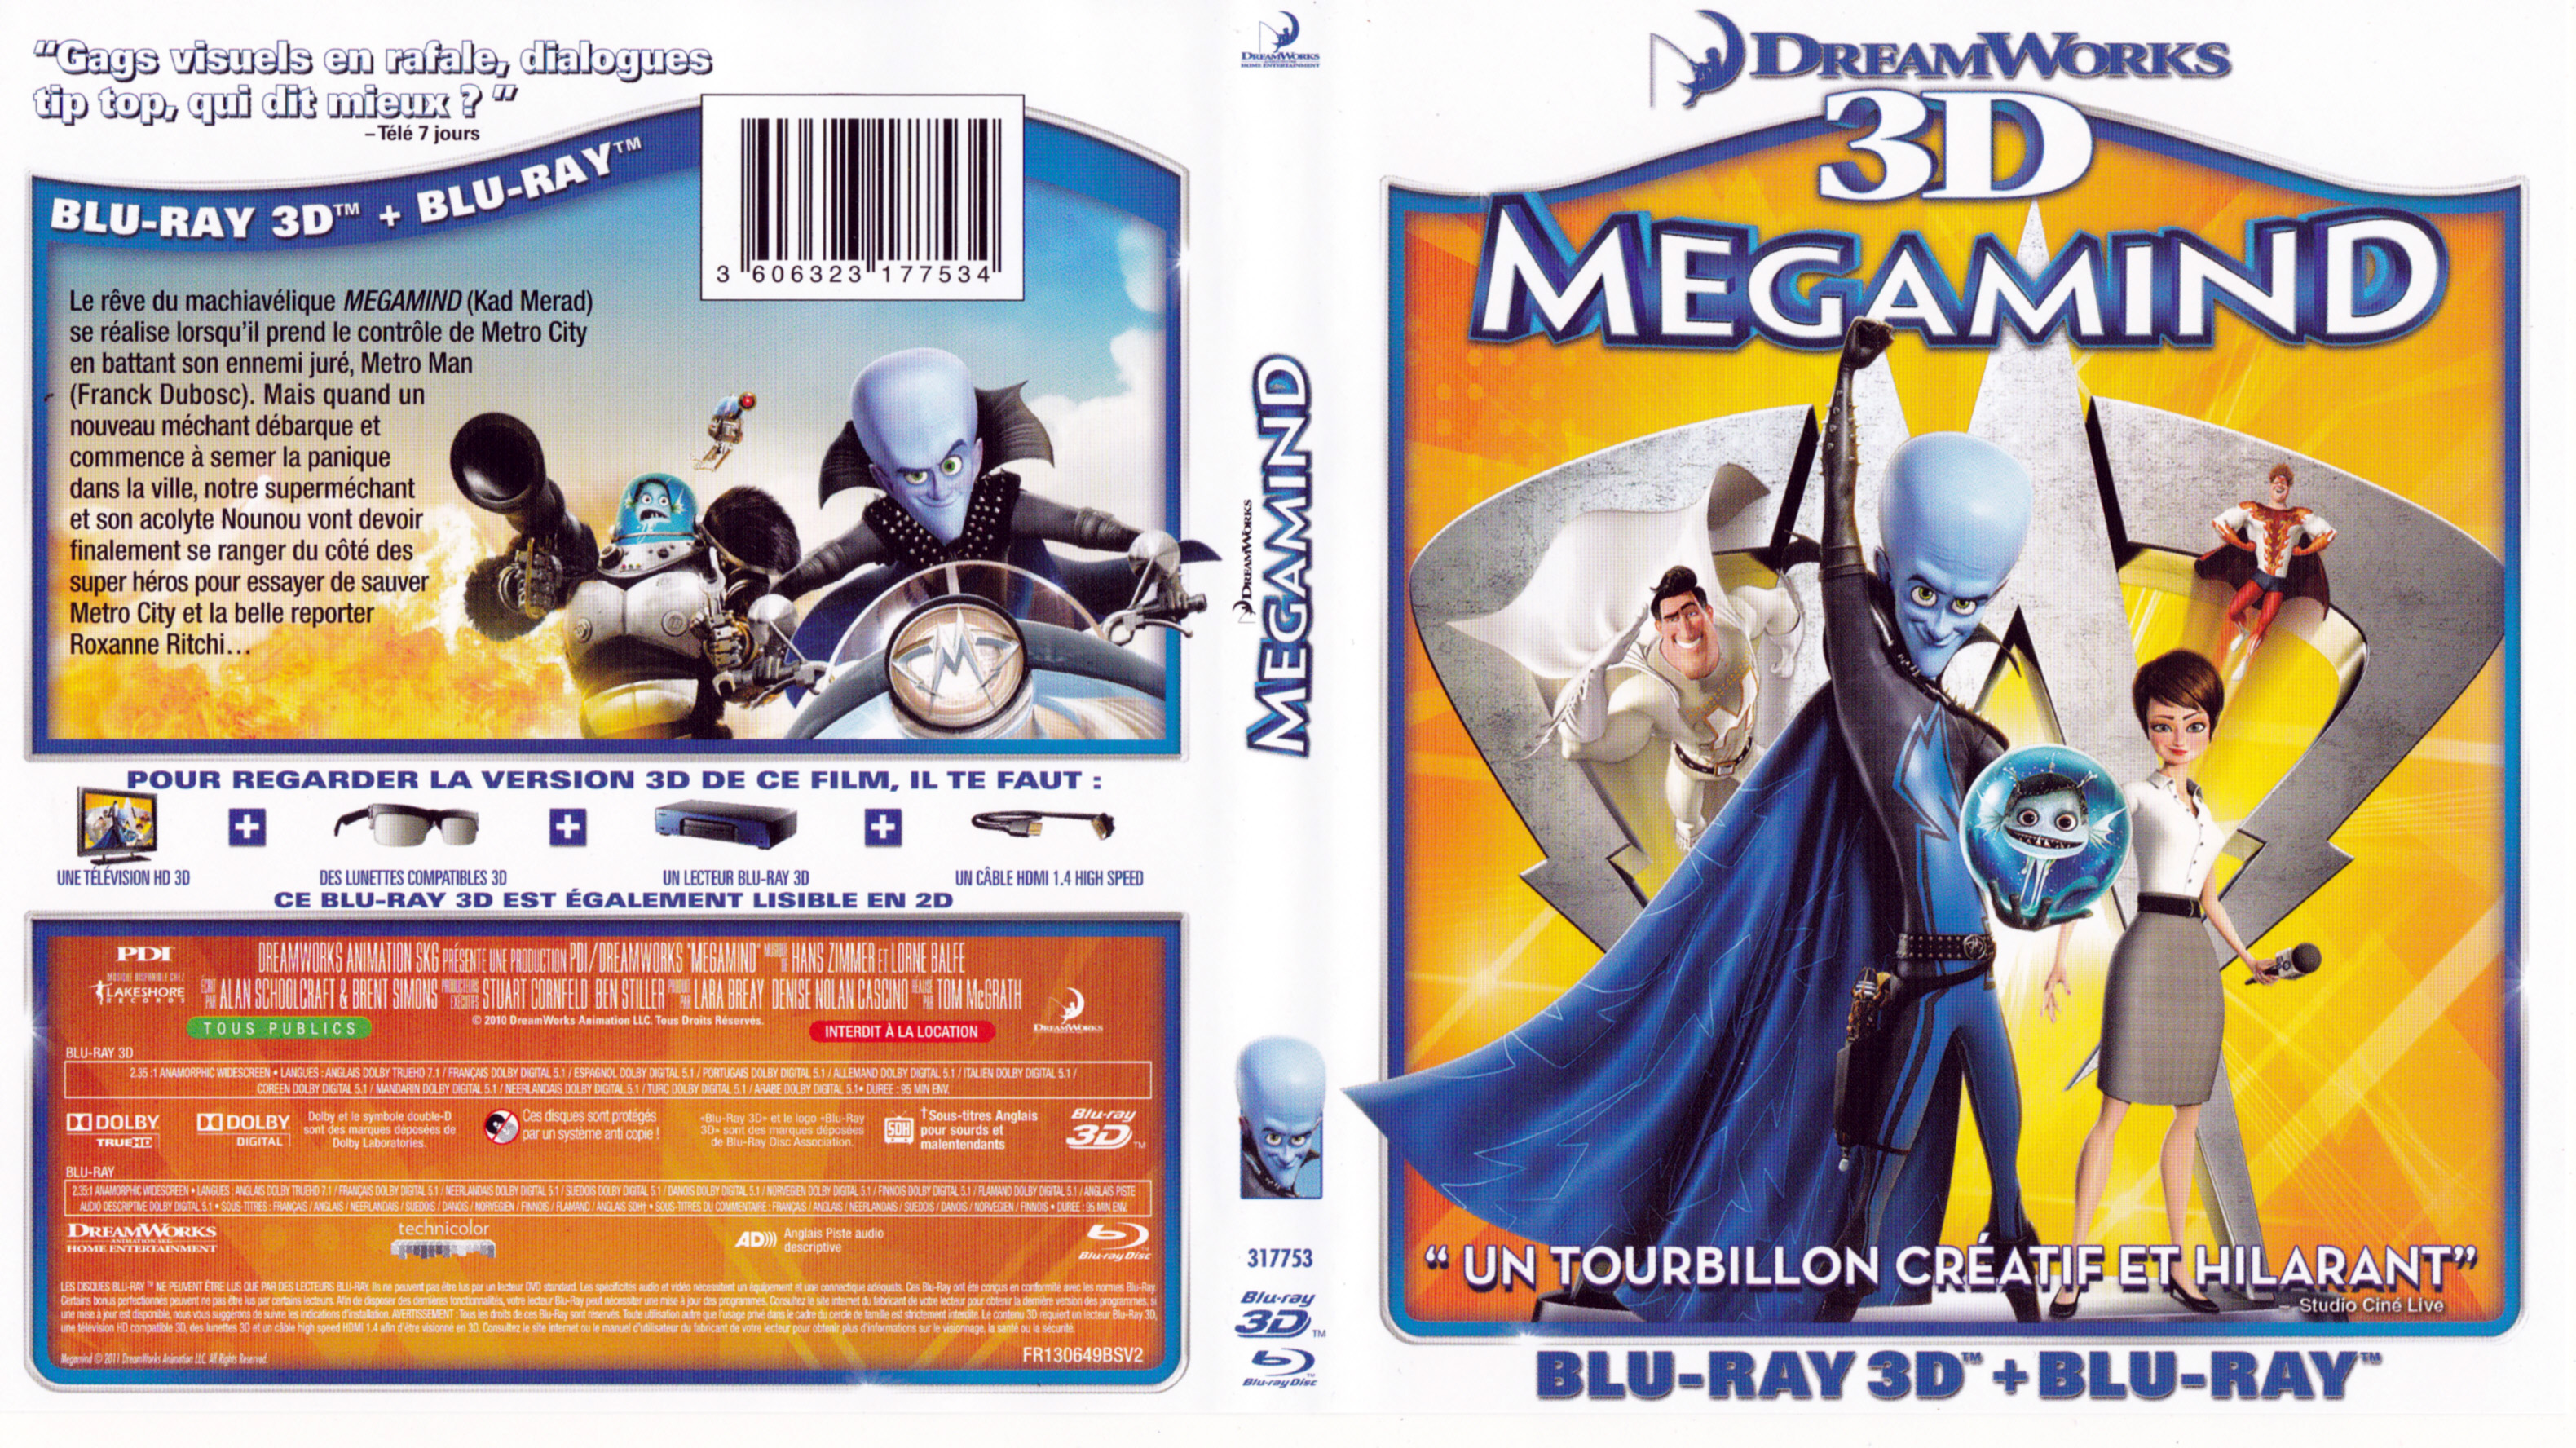 Jaquette DVD Megamind 3D (BLU-RAY)